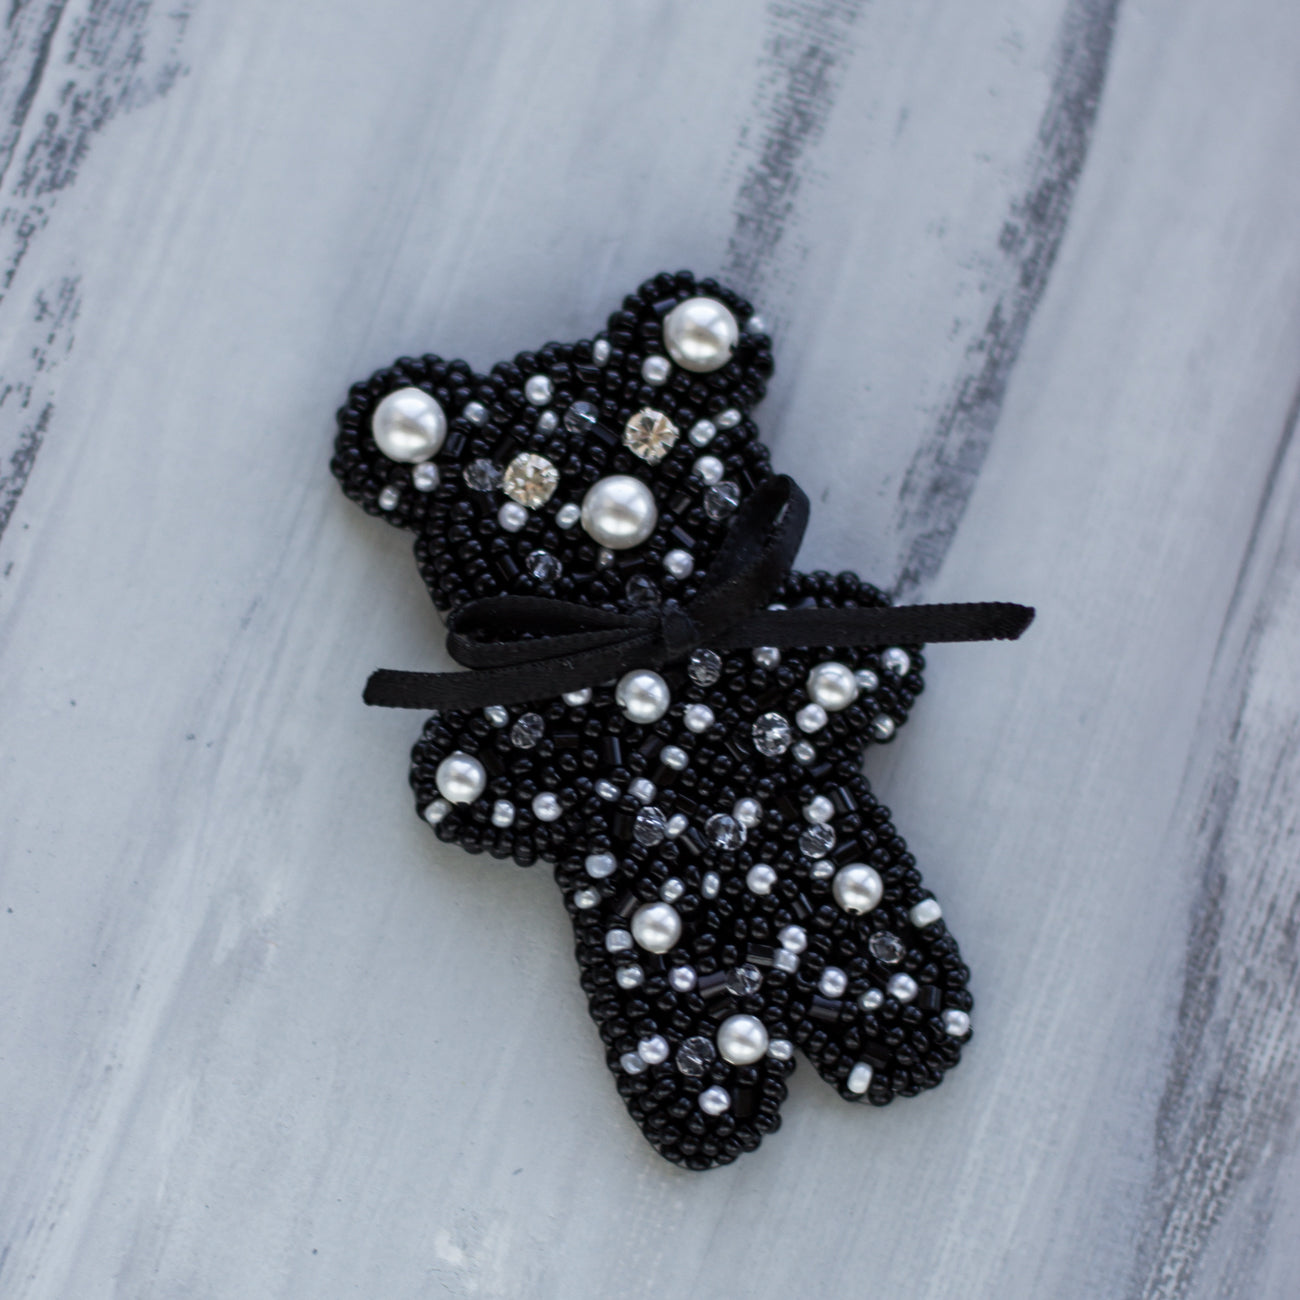 Shop women's jewelry at LeFlowers Bijouterie to discover unique handmade pieces for your wardrobe.  Playful black bear brooch.  Teddy bear accessories. Unique brooch.  Kids accessories. Brooch for kids Gift idea. Handmade bear brooch. 